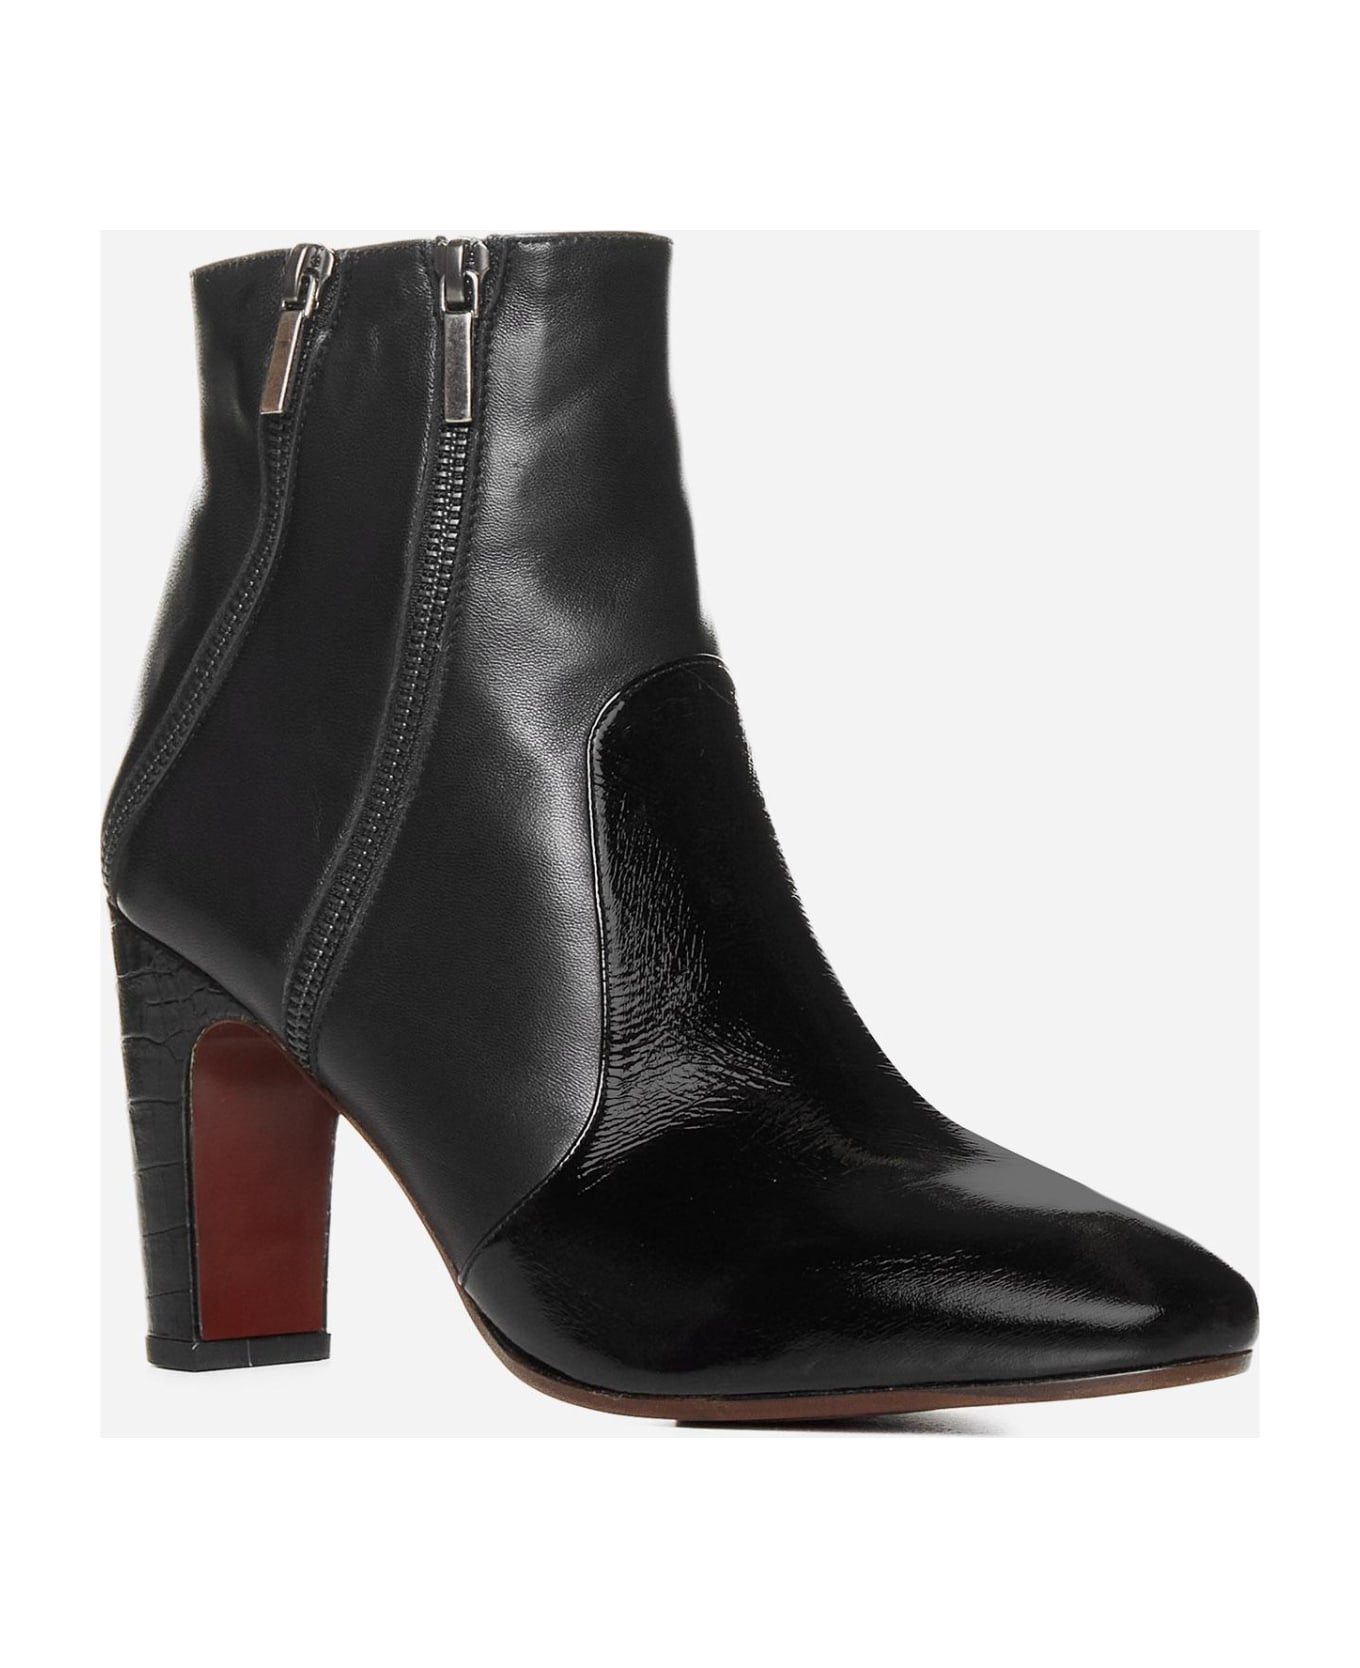 Chie Mihara Ezapi Leather Ankle Boots - BLACK ブーツ